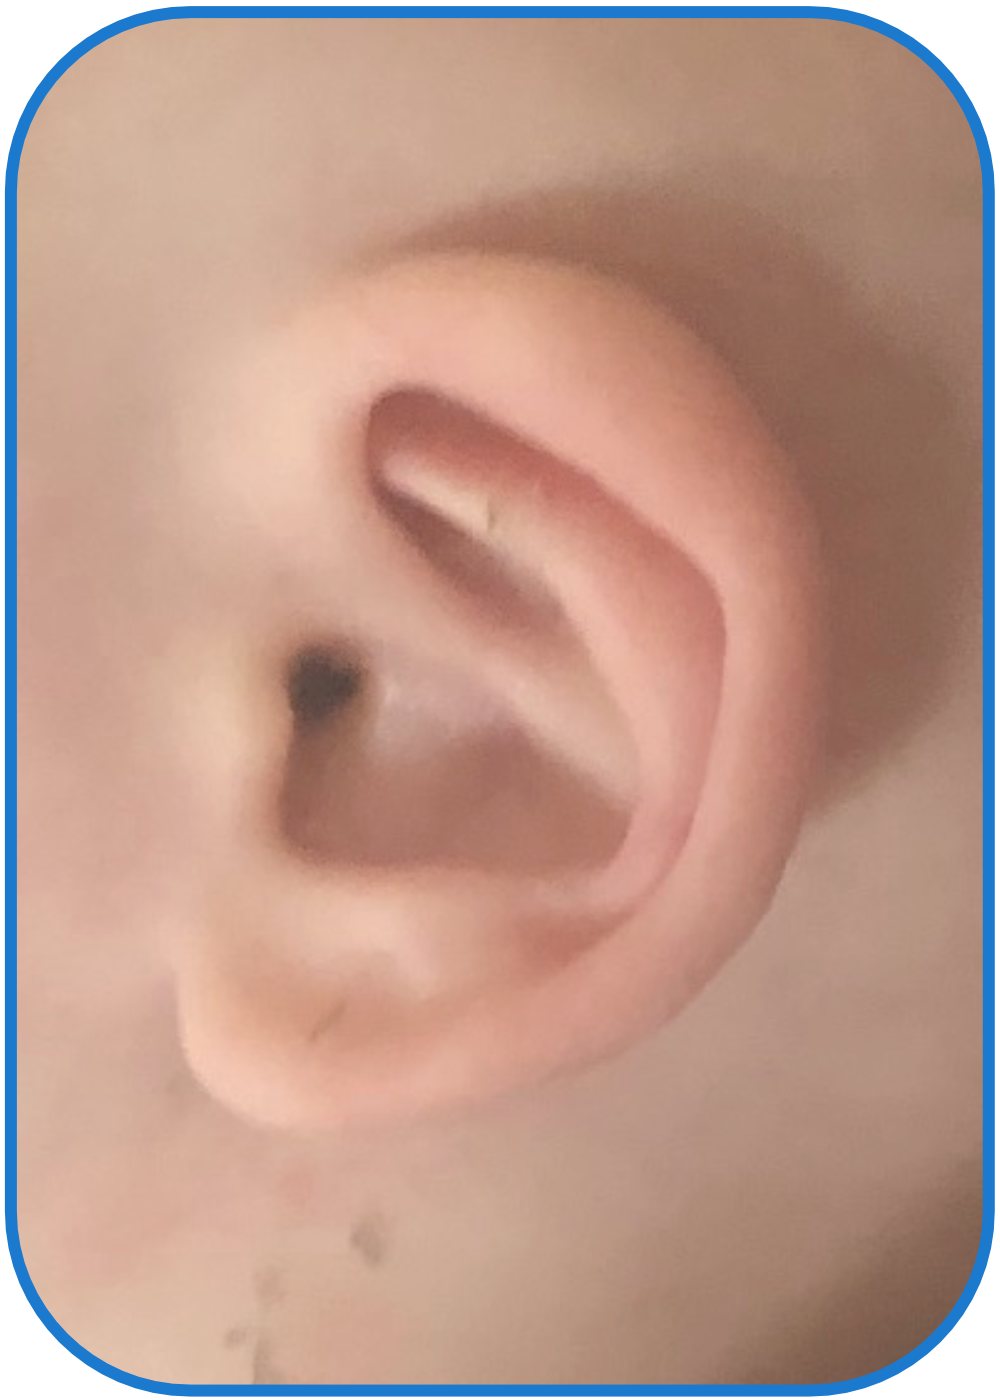 Baby Ear fixed with Ear Buddies